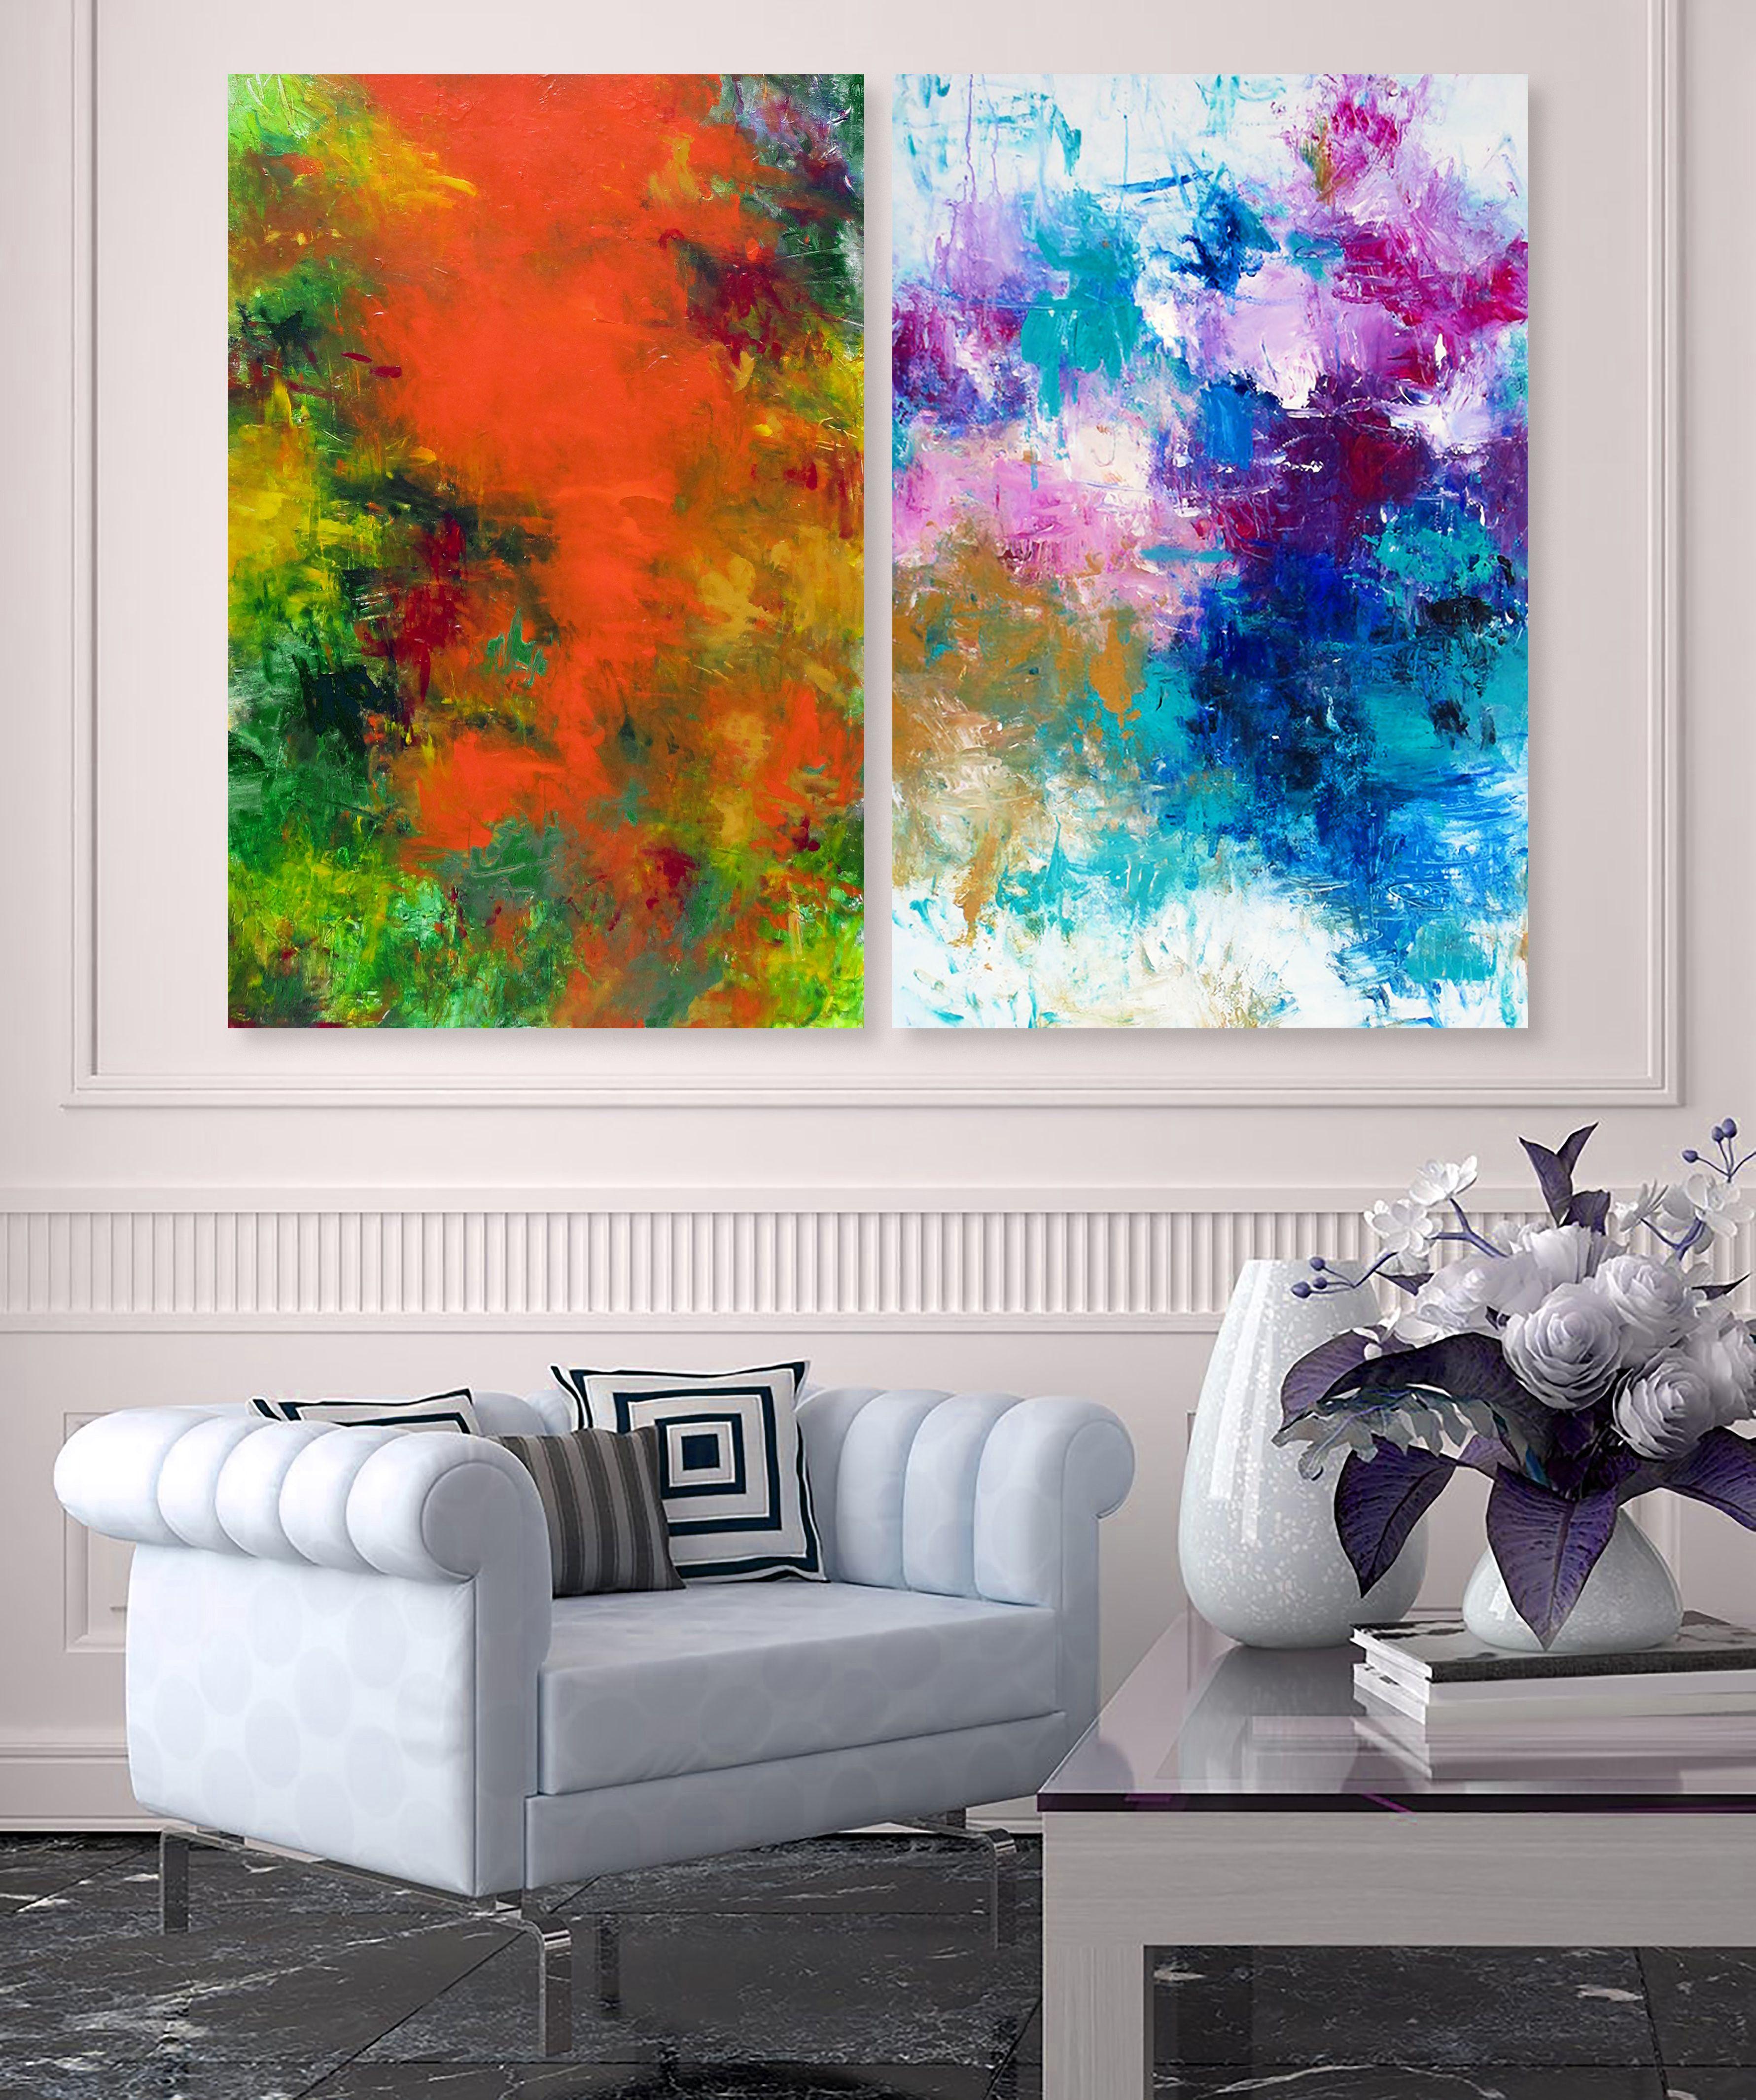 4 paintings together